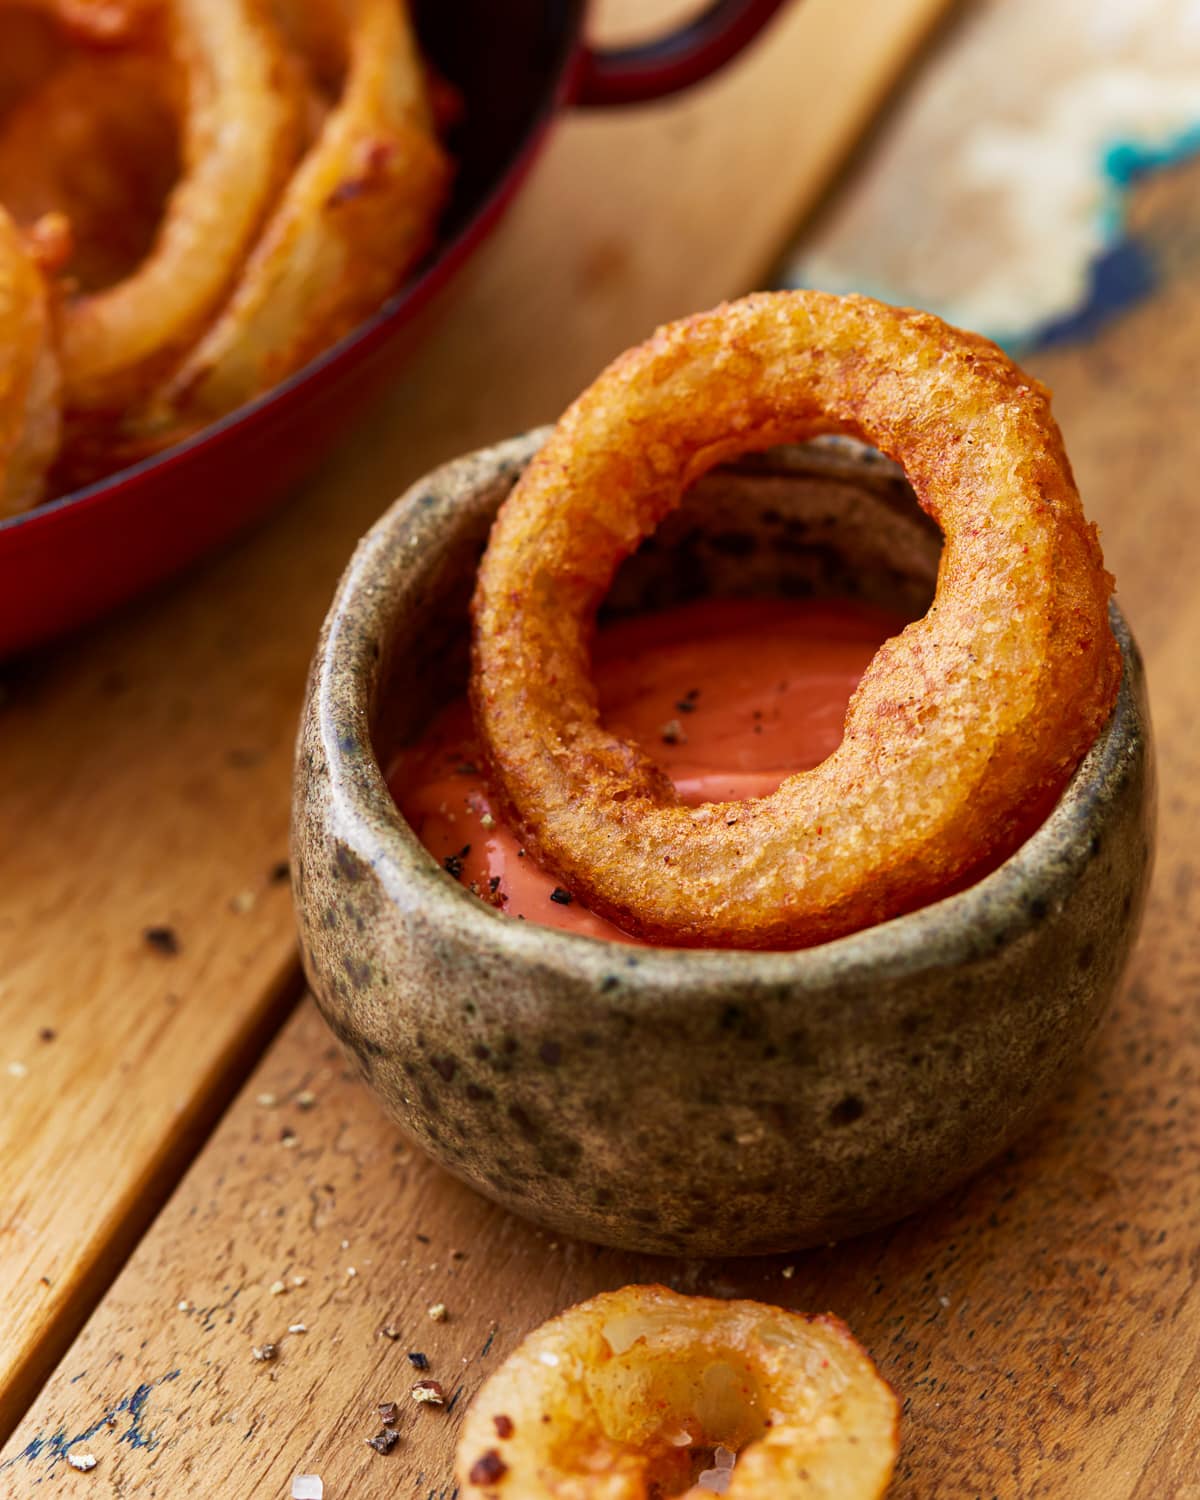 a gluten free onion ring dipped in ketchup.